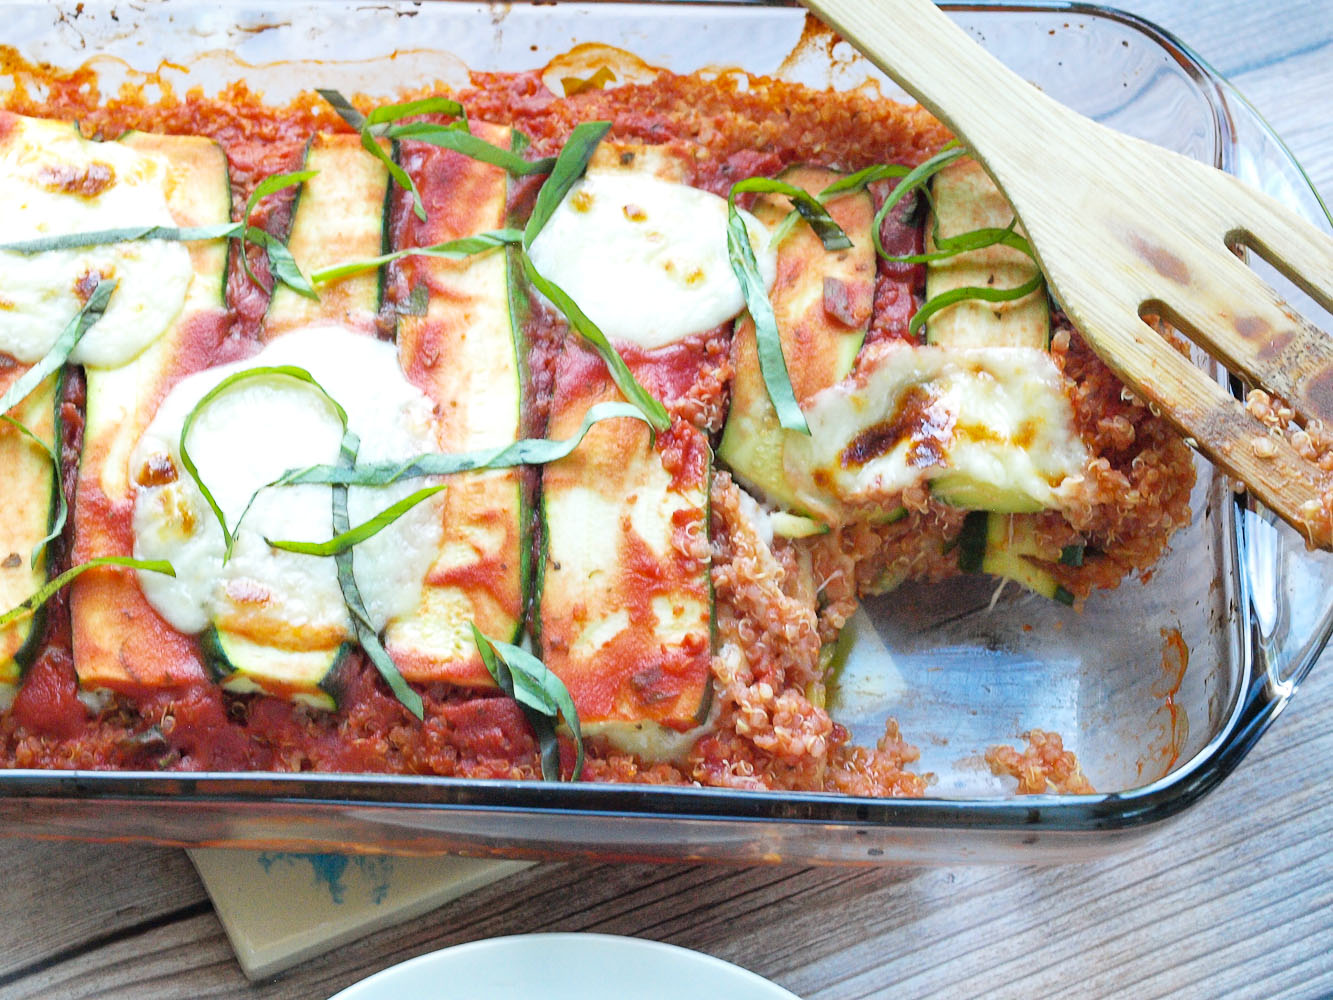 Vegetarian Zucchini Quinoa Lasagna recipe. This is a great, gluten-free way to enjoy the flavors of lasagna! It's so much lighter than regular lasagna! This is a perfect summer dinner that the whole family will love.